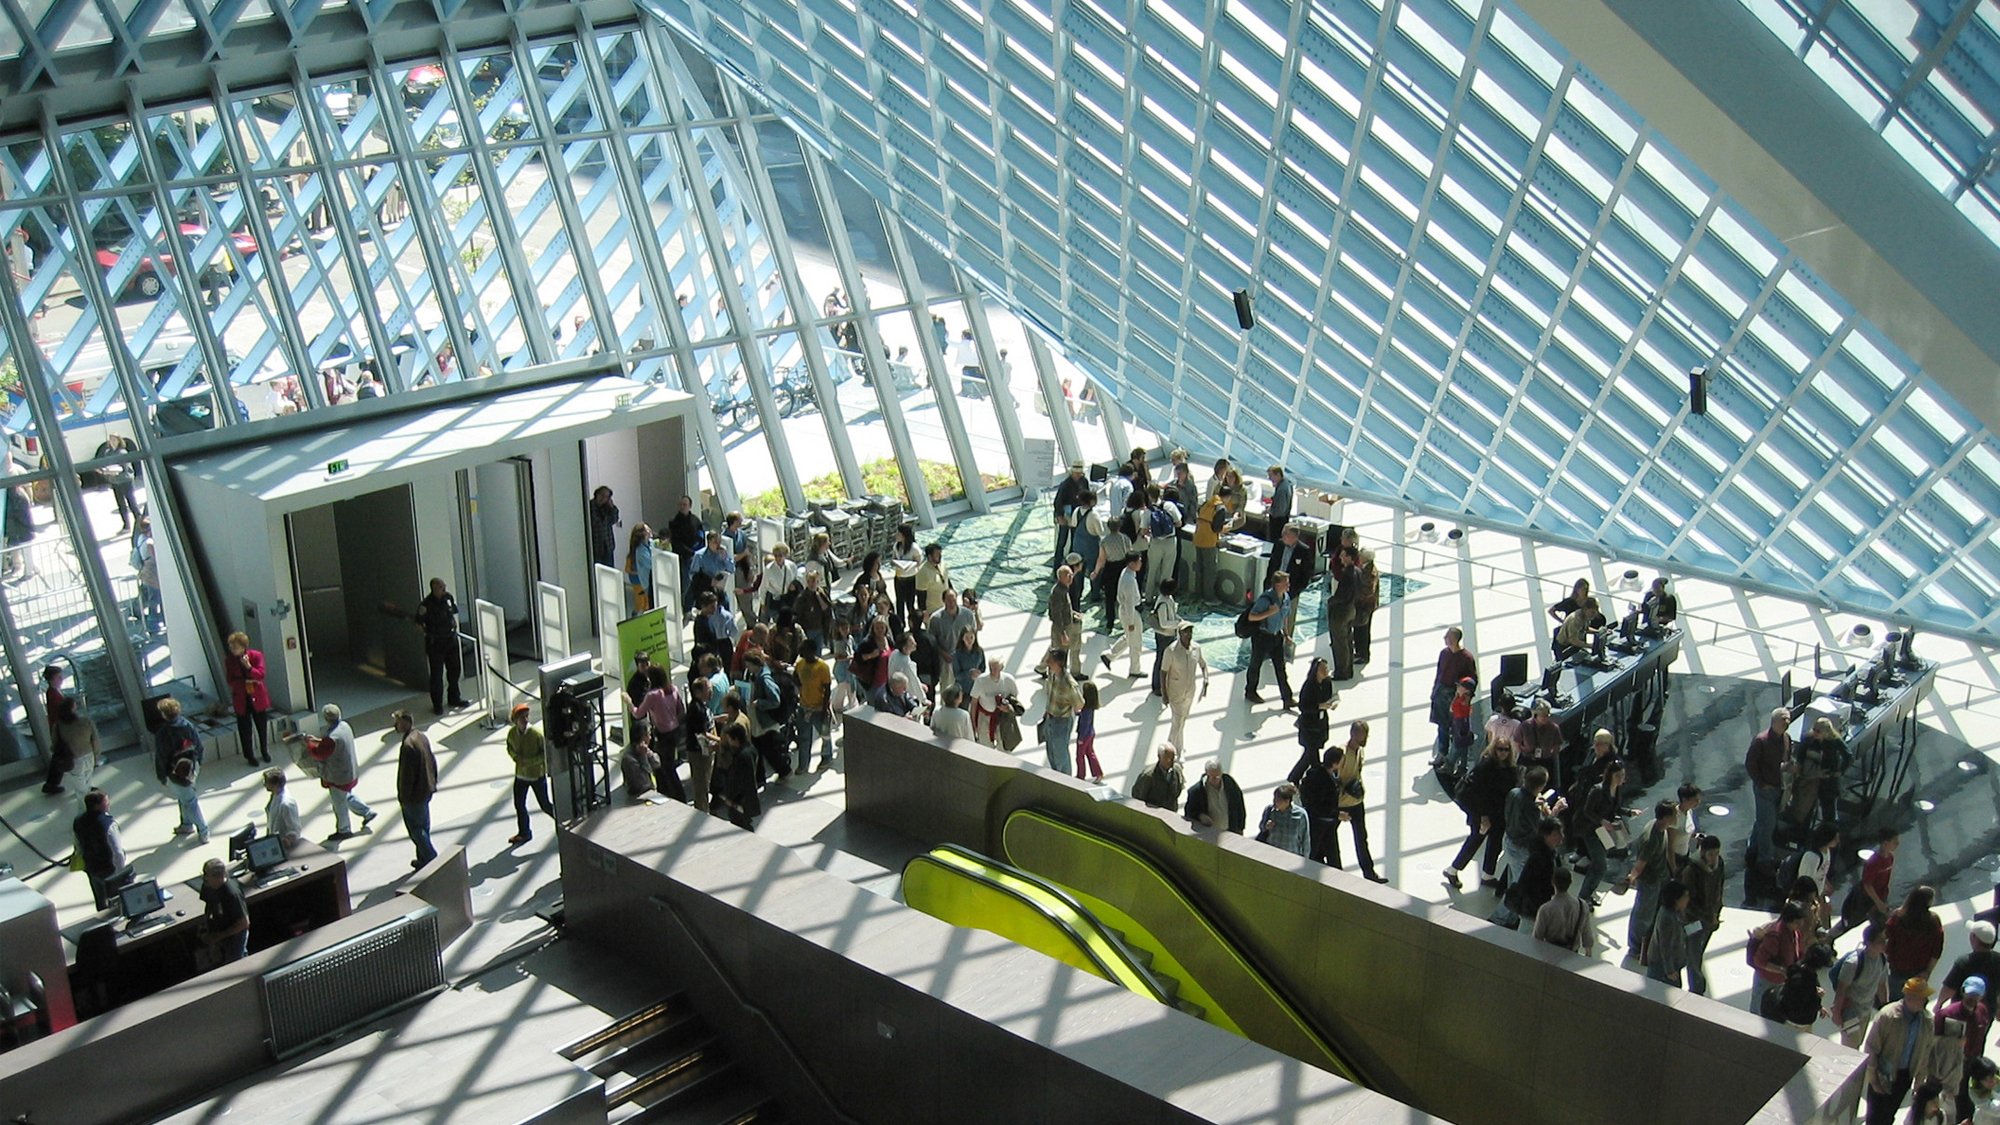 Environmental Consulting For The Seattle Central Library Arup